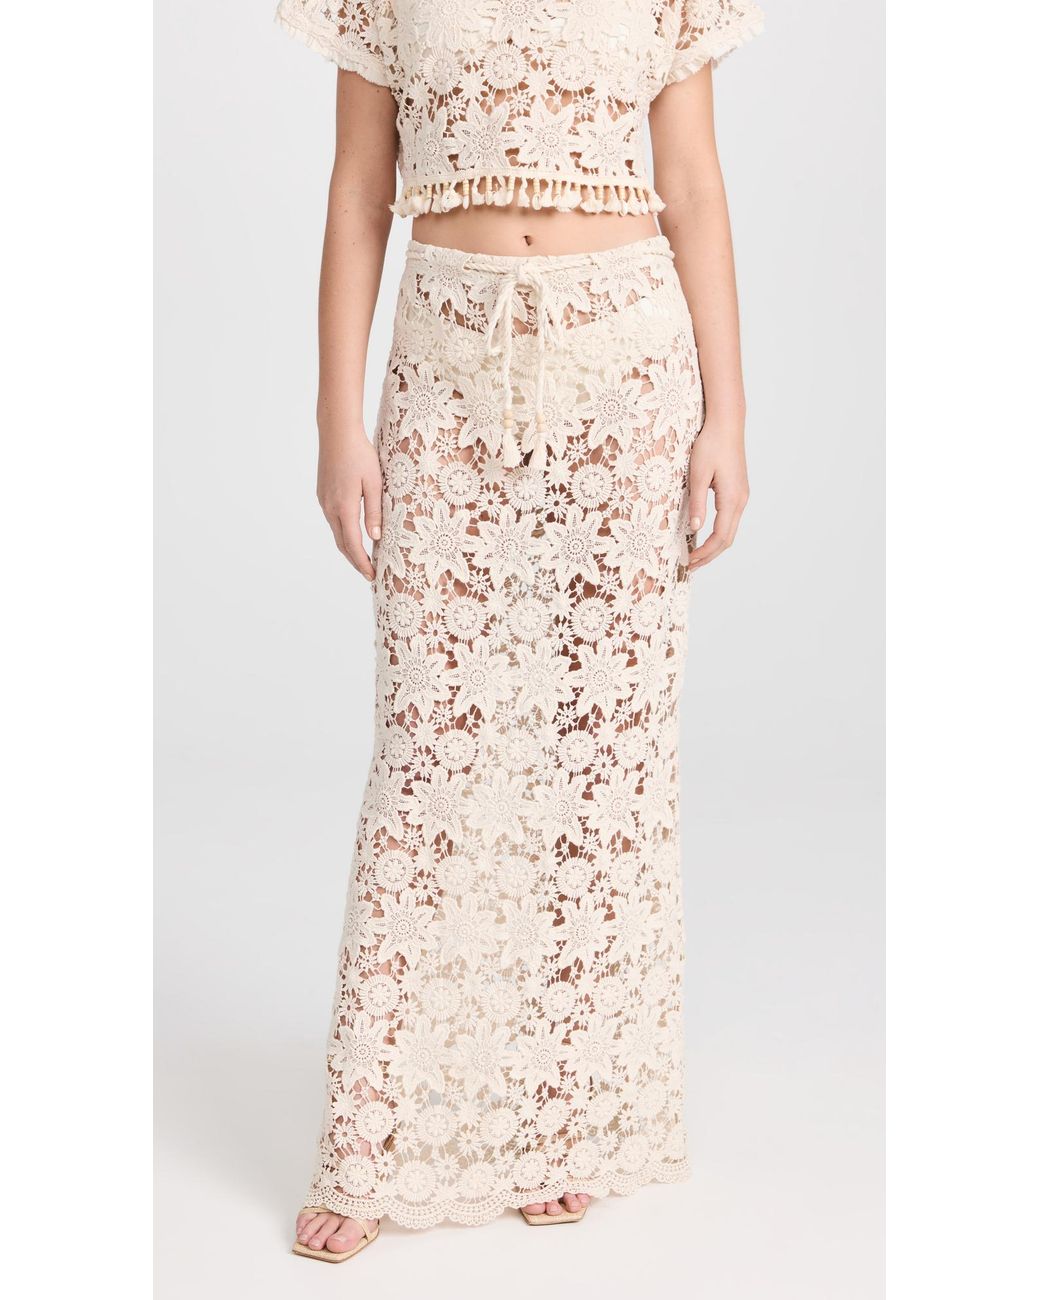 Just BEE Queen Rosie Maxi Skirt in Natural | Lyst